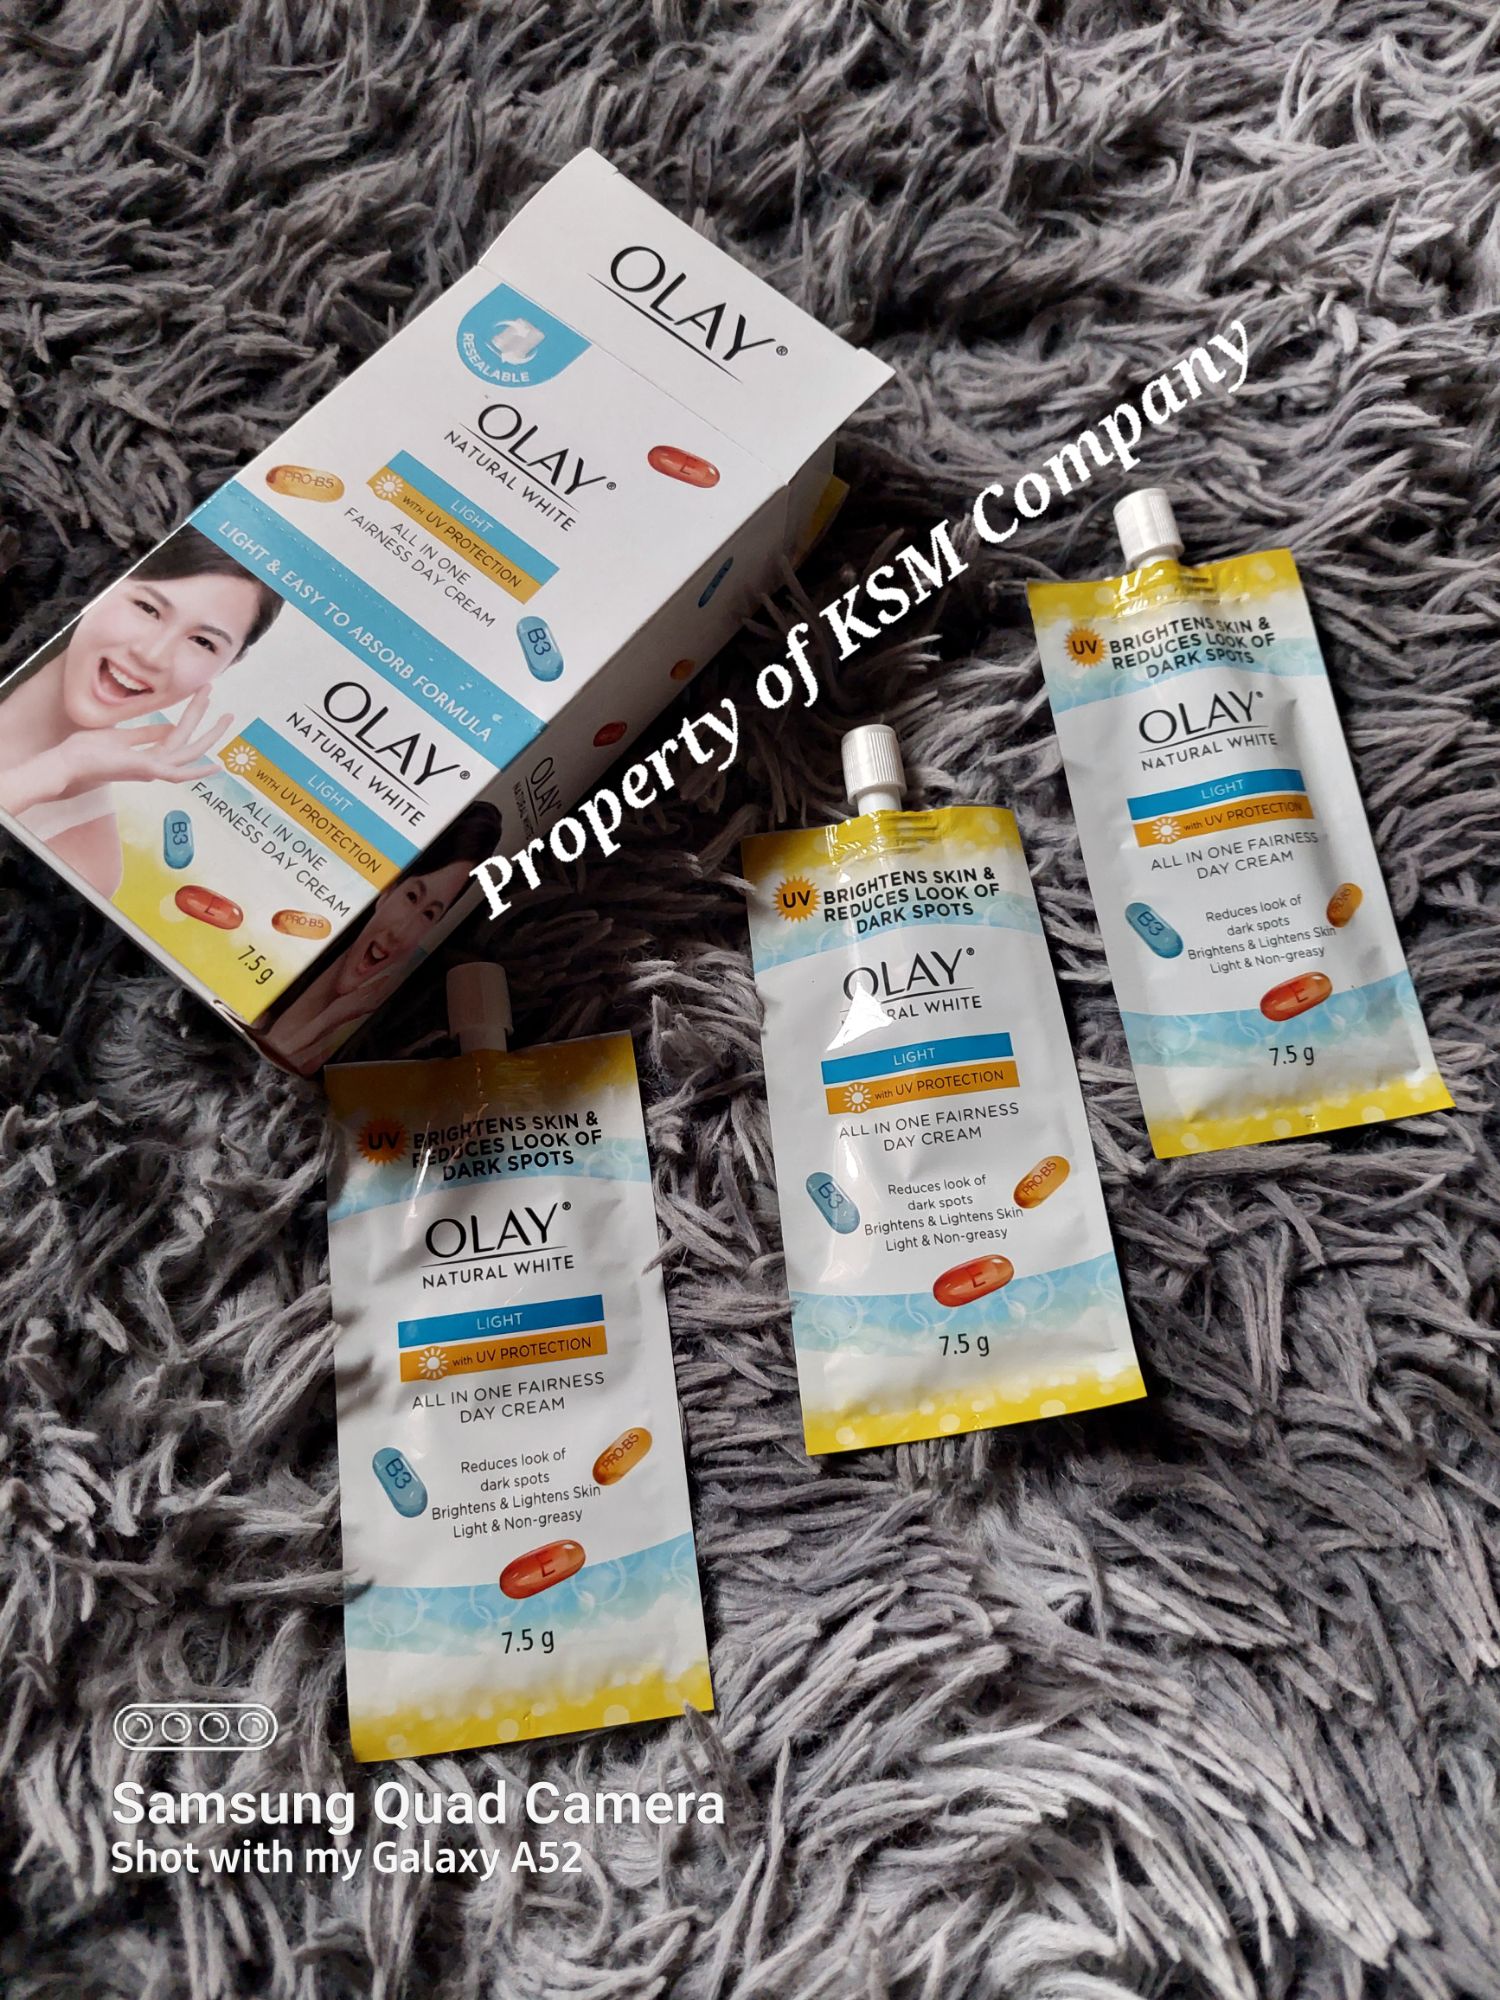 Olay Natural White Light w/ UV Protection All in One Fairness Day Cream 7.5g/Per Sachet, 100% Original Olay All in One Fairness Cream from Olay Philippines